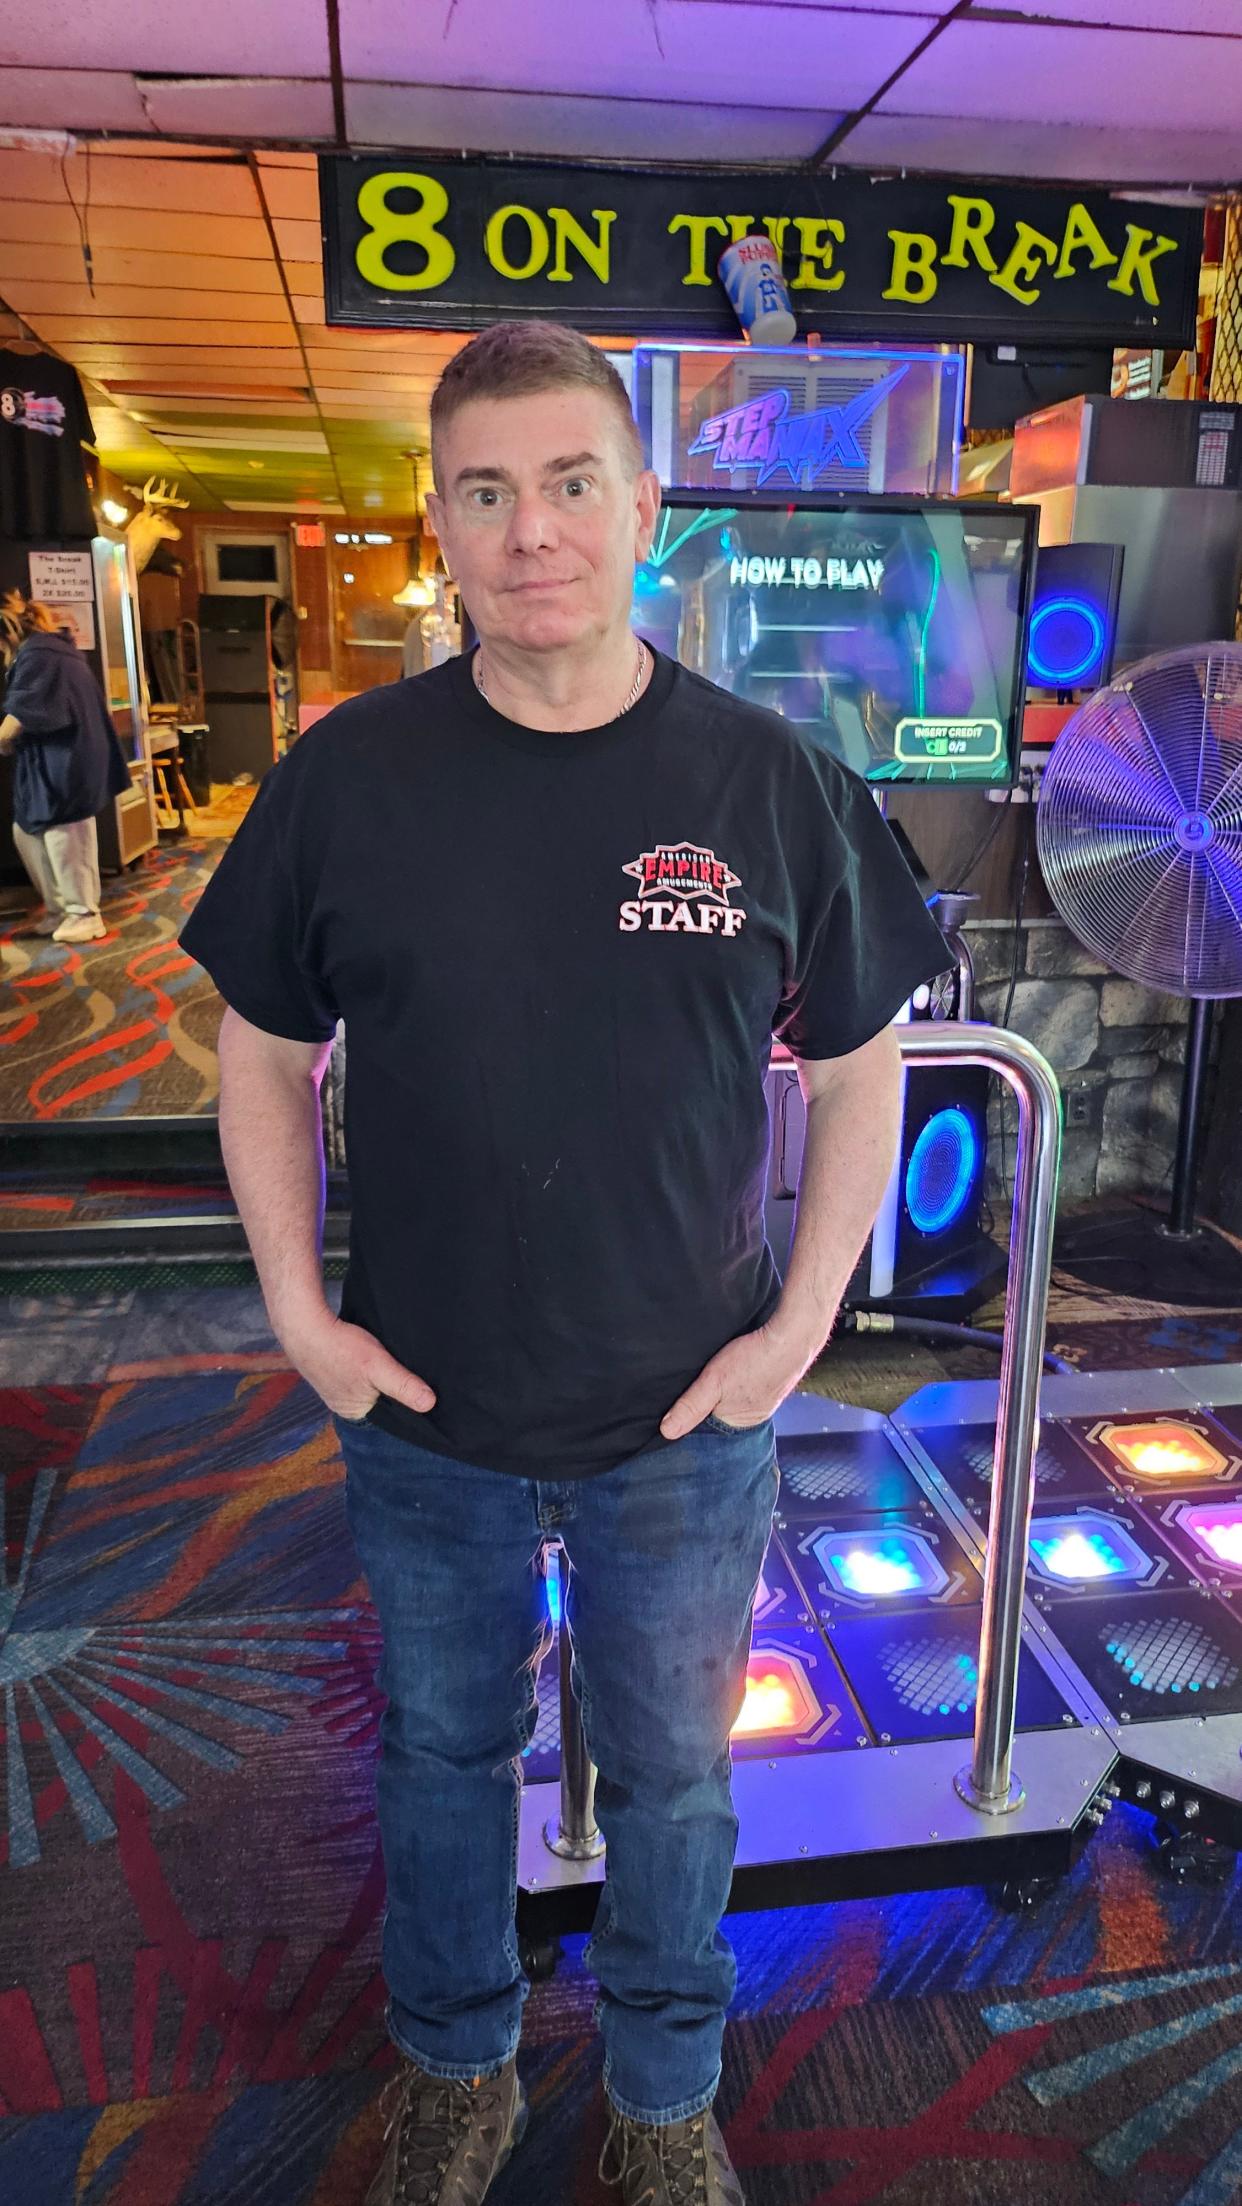 Chris Cotty, owner of The Break Arcade.